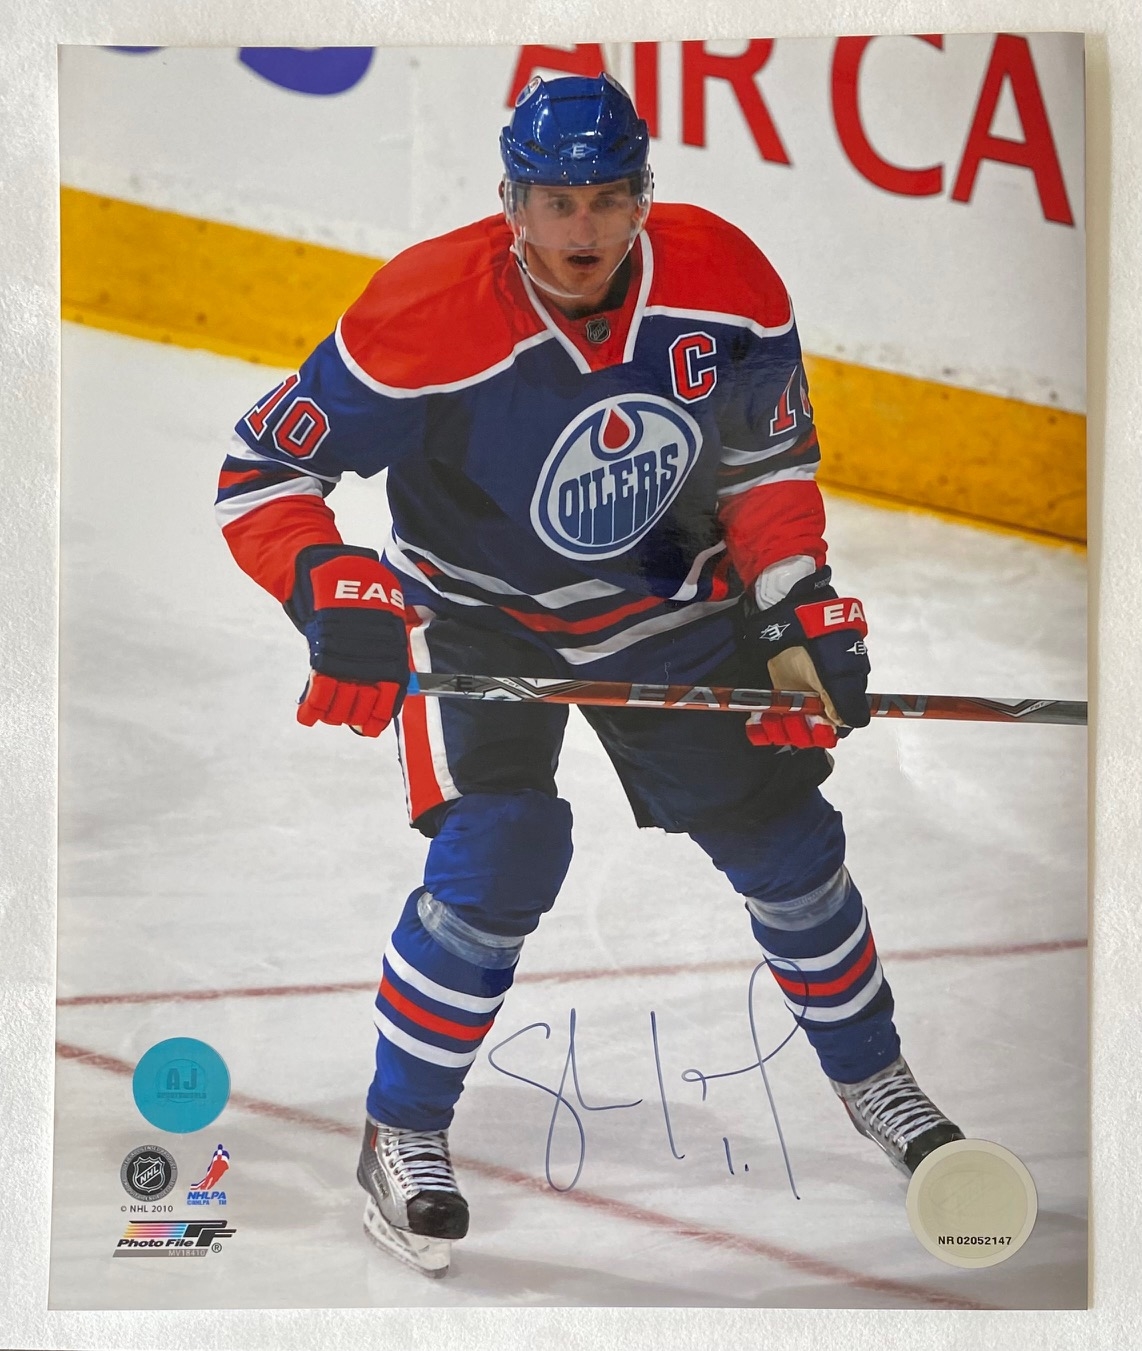 Shawn Horcoff Edmonton Oilers Captain Signed 8x10 Photo (Flawed)